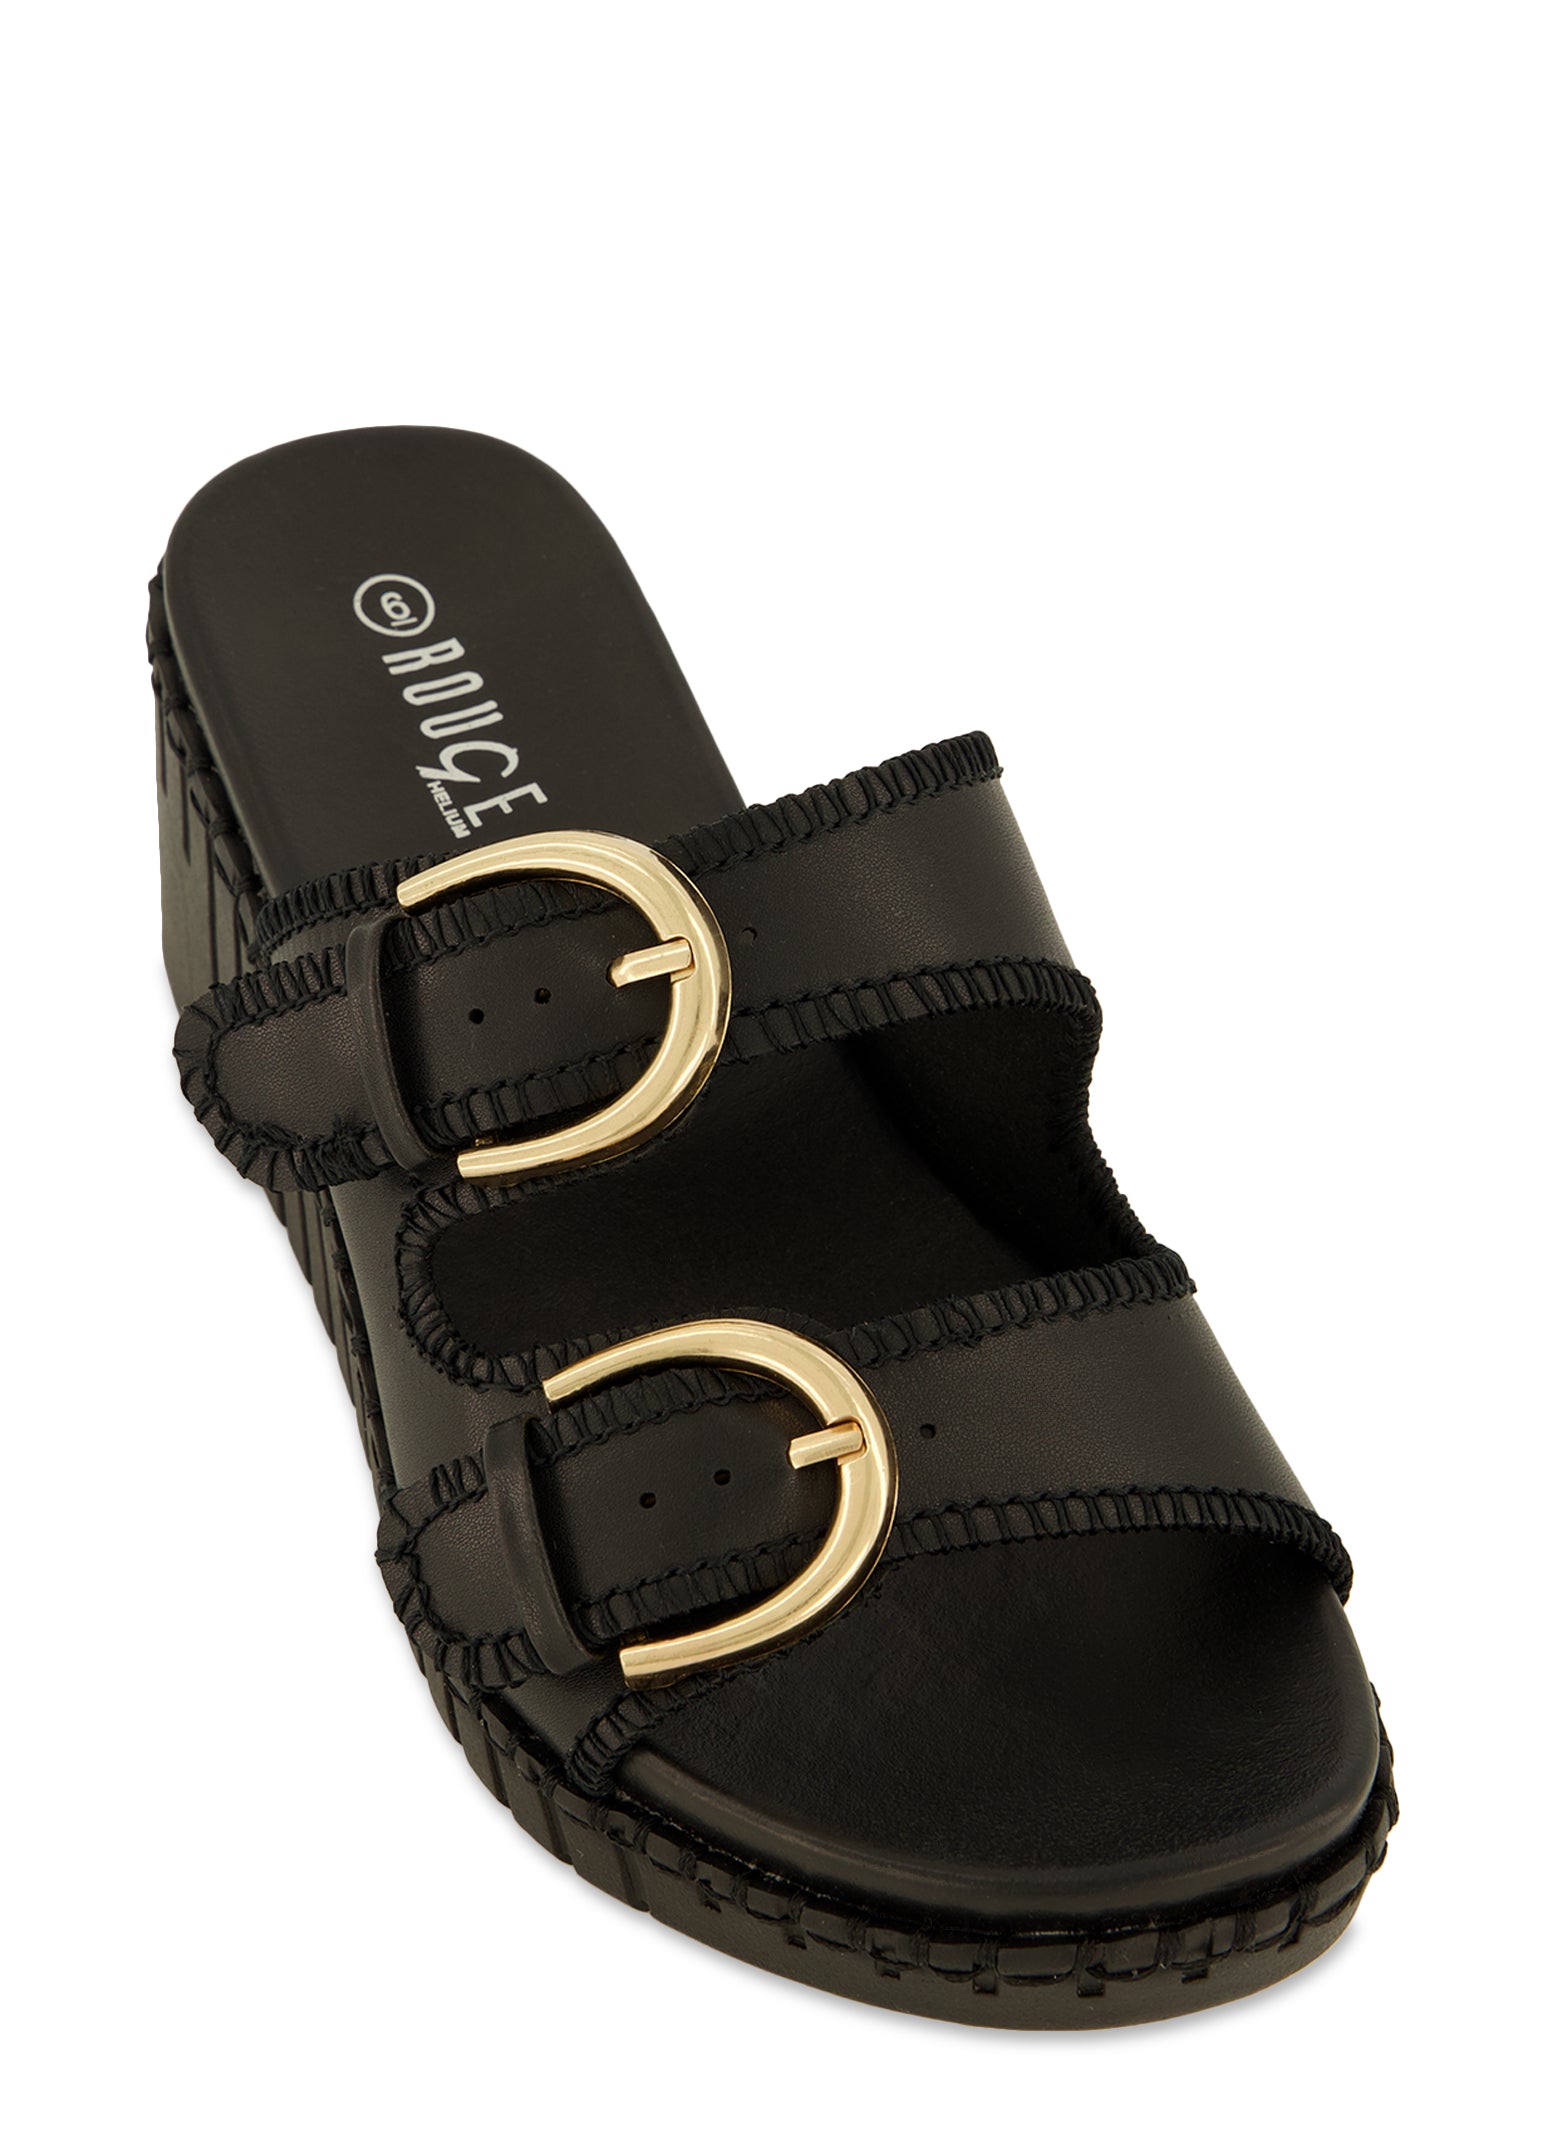 Womens Double Buckle Strap Wedge Slide Sandals,